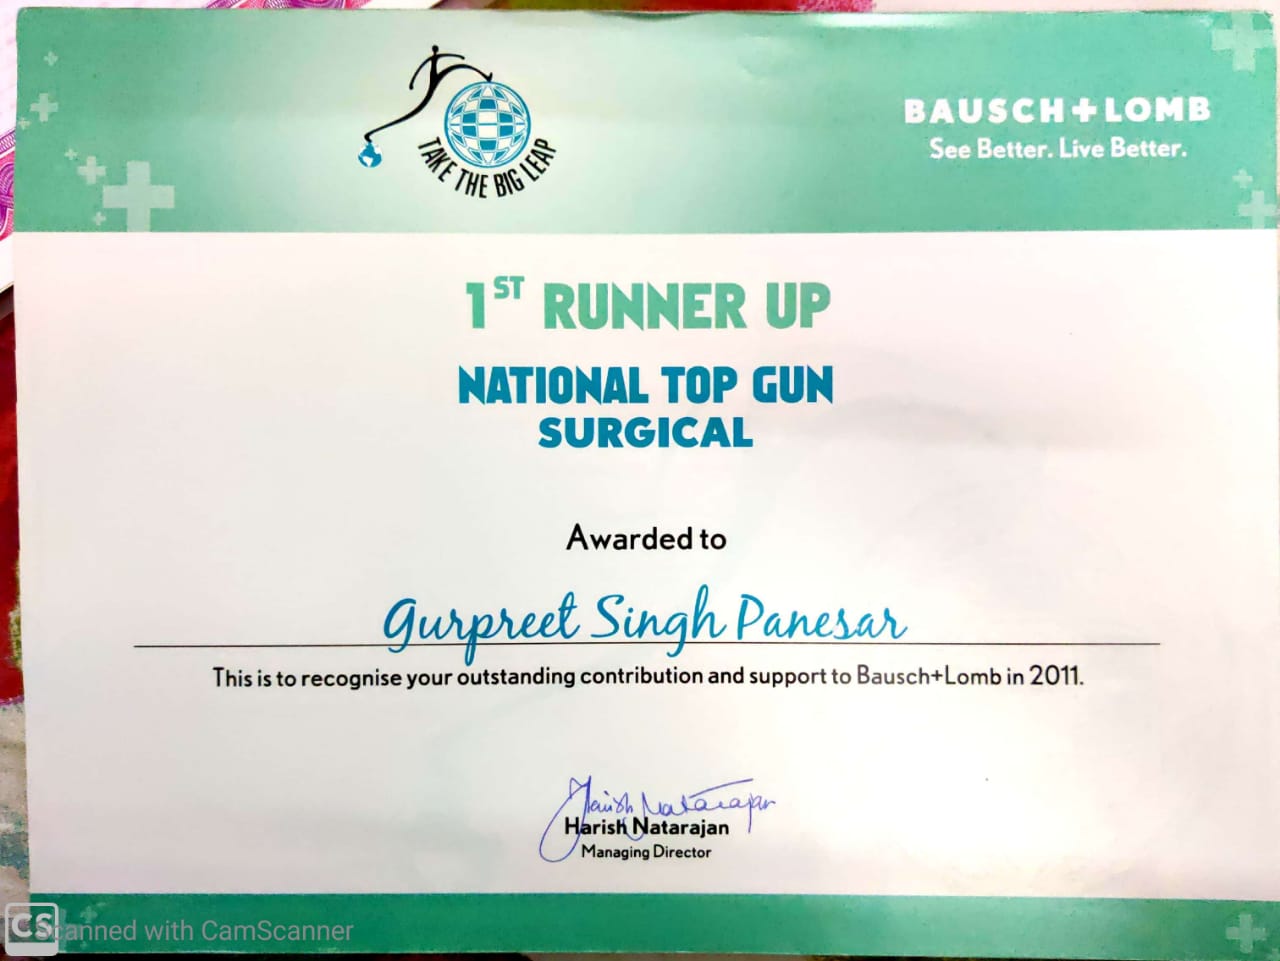 Bausch and Lomb national sales achievement certificate